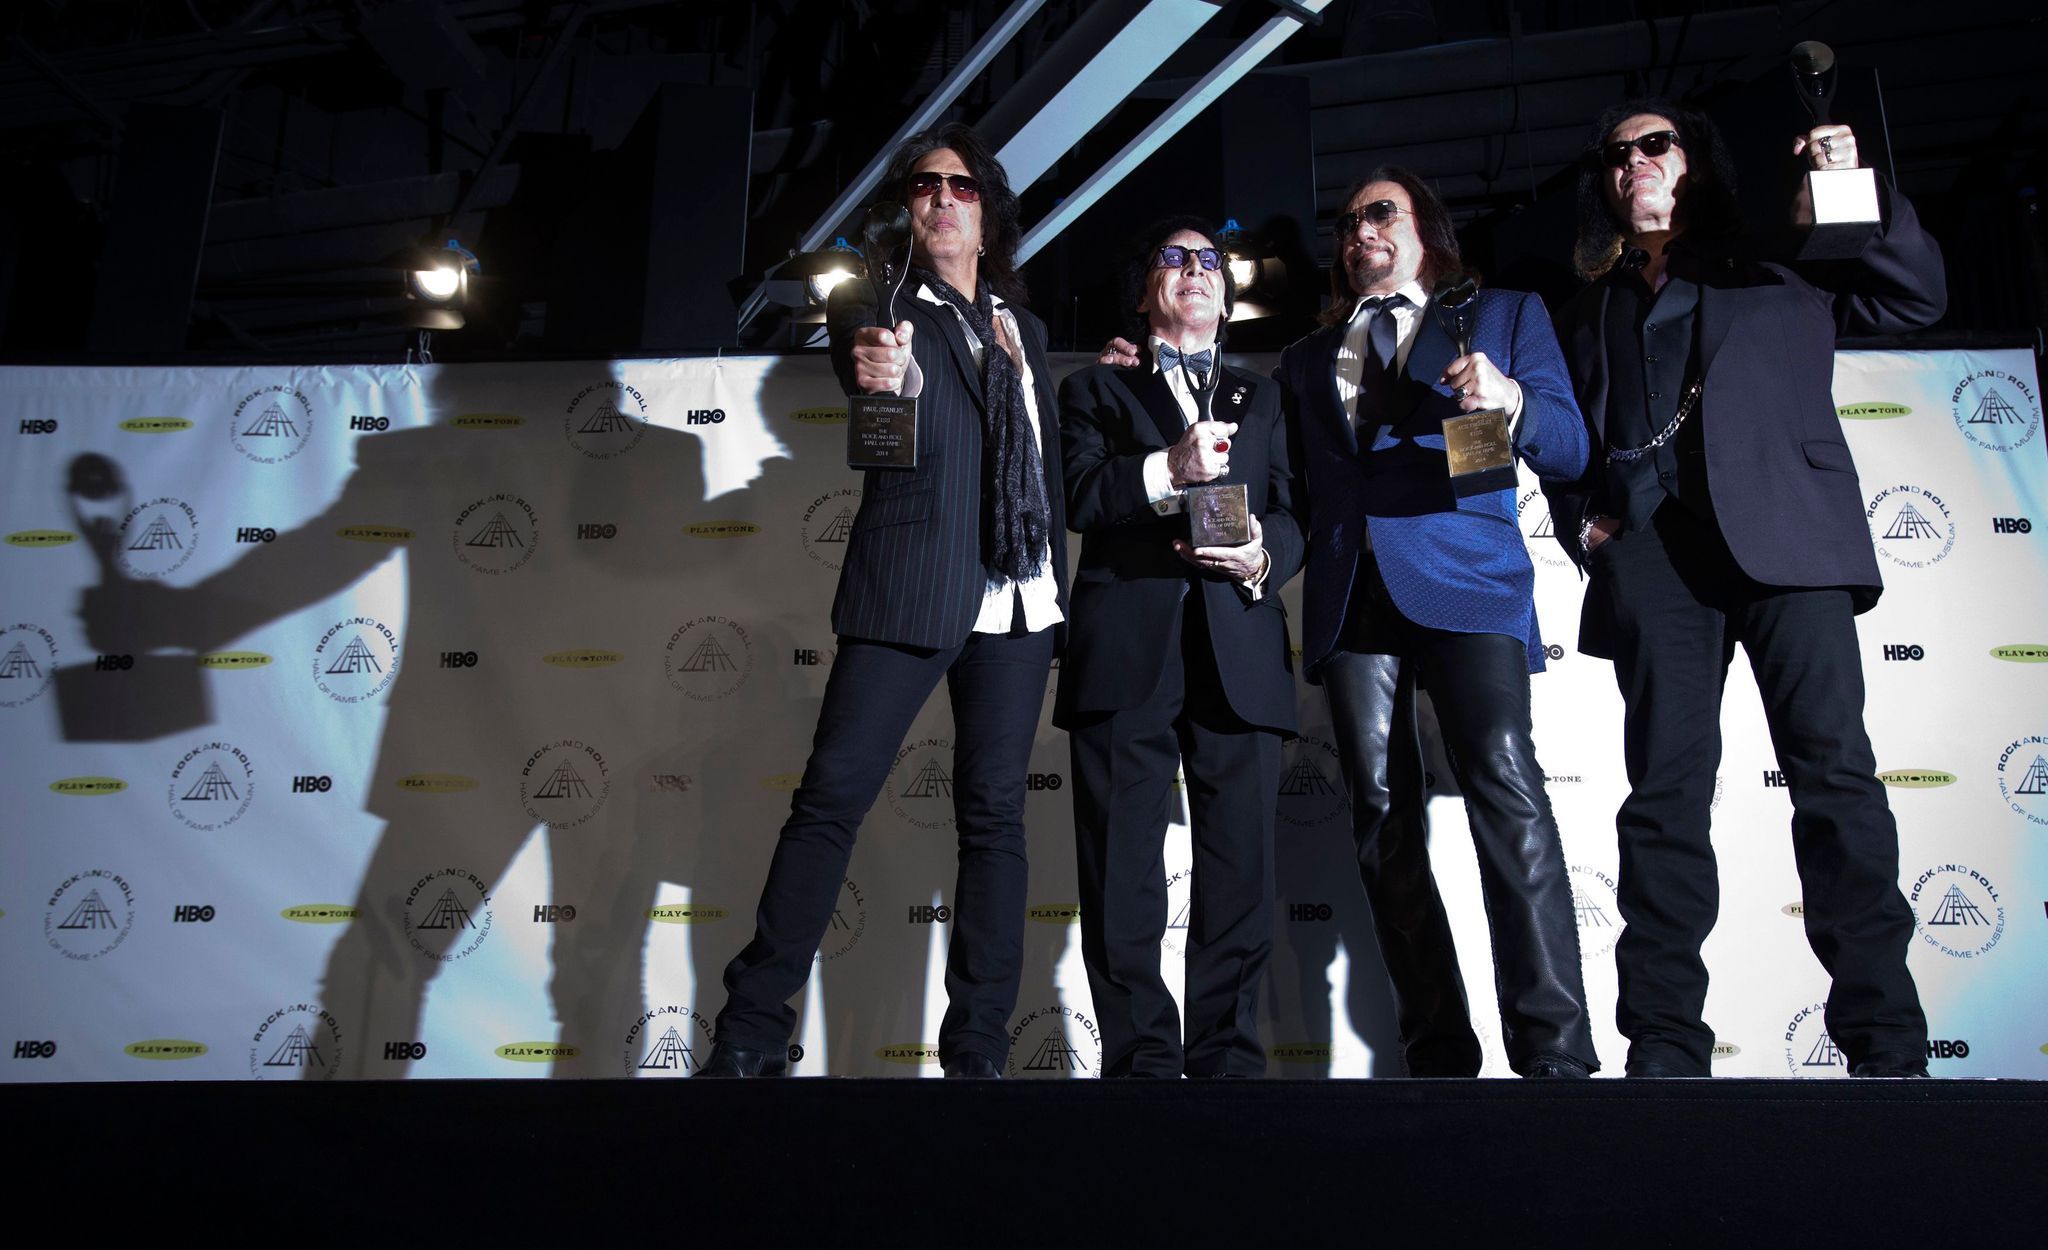 Kiss band members pose with their awards after the rock band was inducted at the 29th annual Rock and Roll Hall of Fame Induction Ceremony in Brooklyn